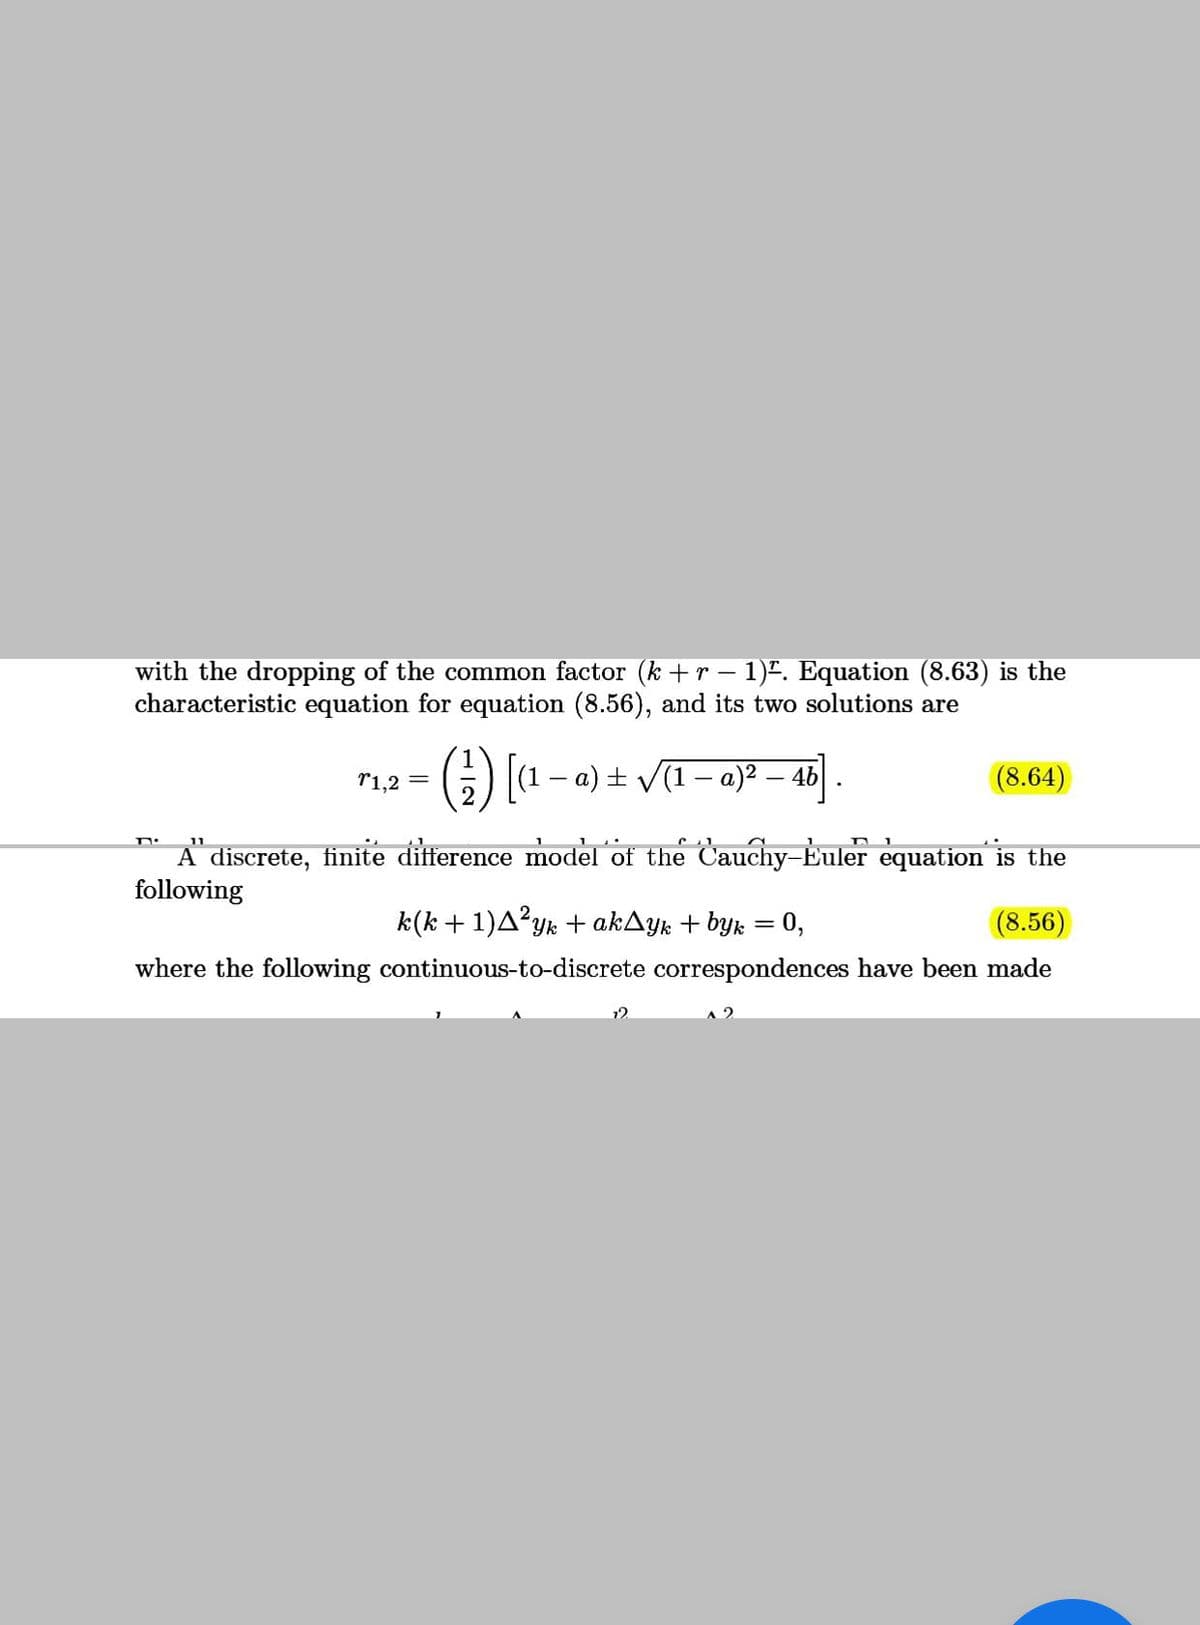 with the dropping of the common factor (k +r – 1)". Equation (8.63) is the
characteristic equation for equation (8.56), and its two solutions are
r1,2 =
|(1 – a) + V(1- a)2 – 4b
(8.64)
11
A discrete, finite difference model of the Cauchy–Euler equation is the
following
k(k +1)A?yk + akAyk + byk = 0,
(8.56)
|
where the following continuous-to-discrete correspondences have been made
12
